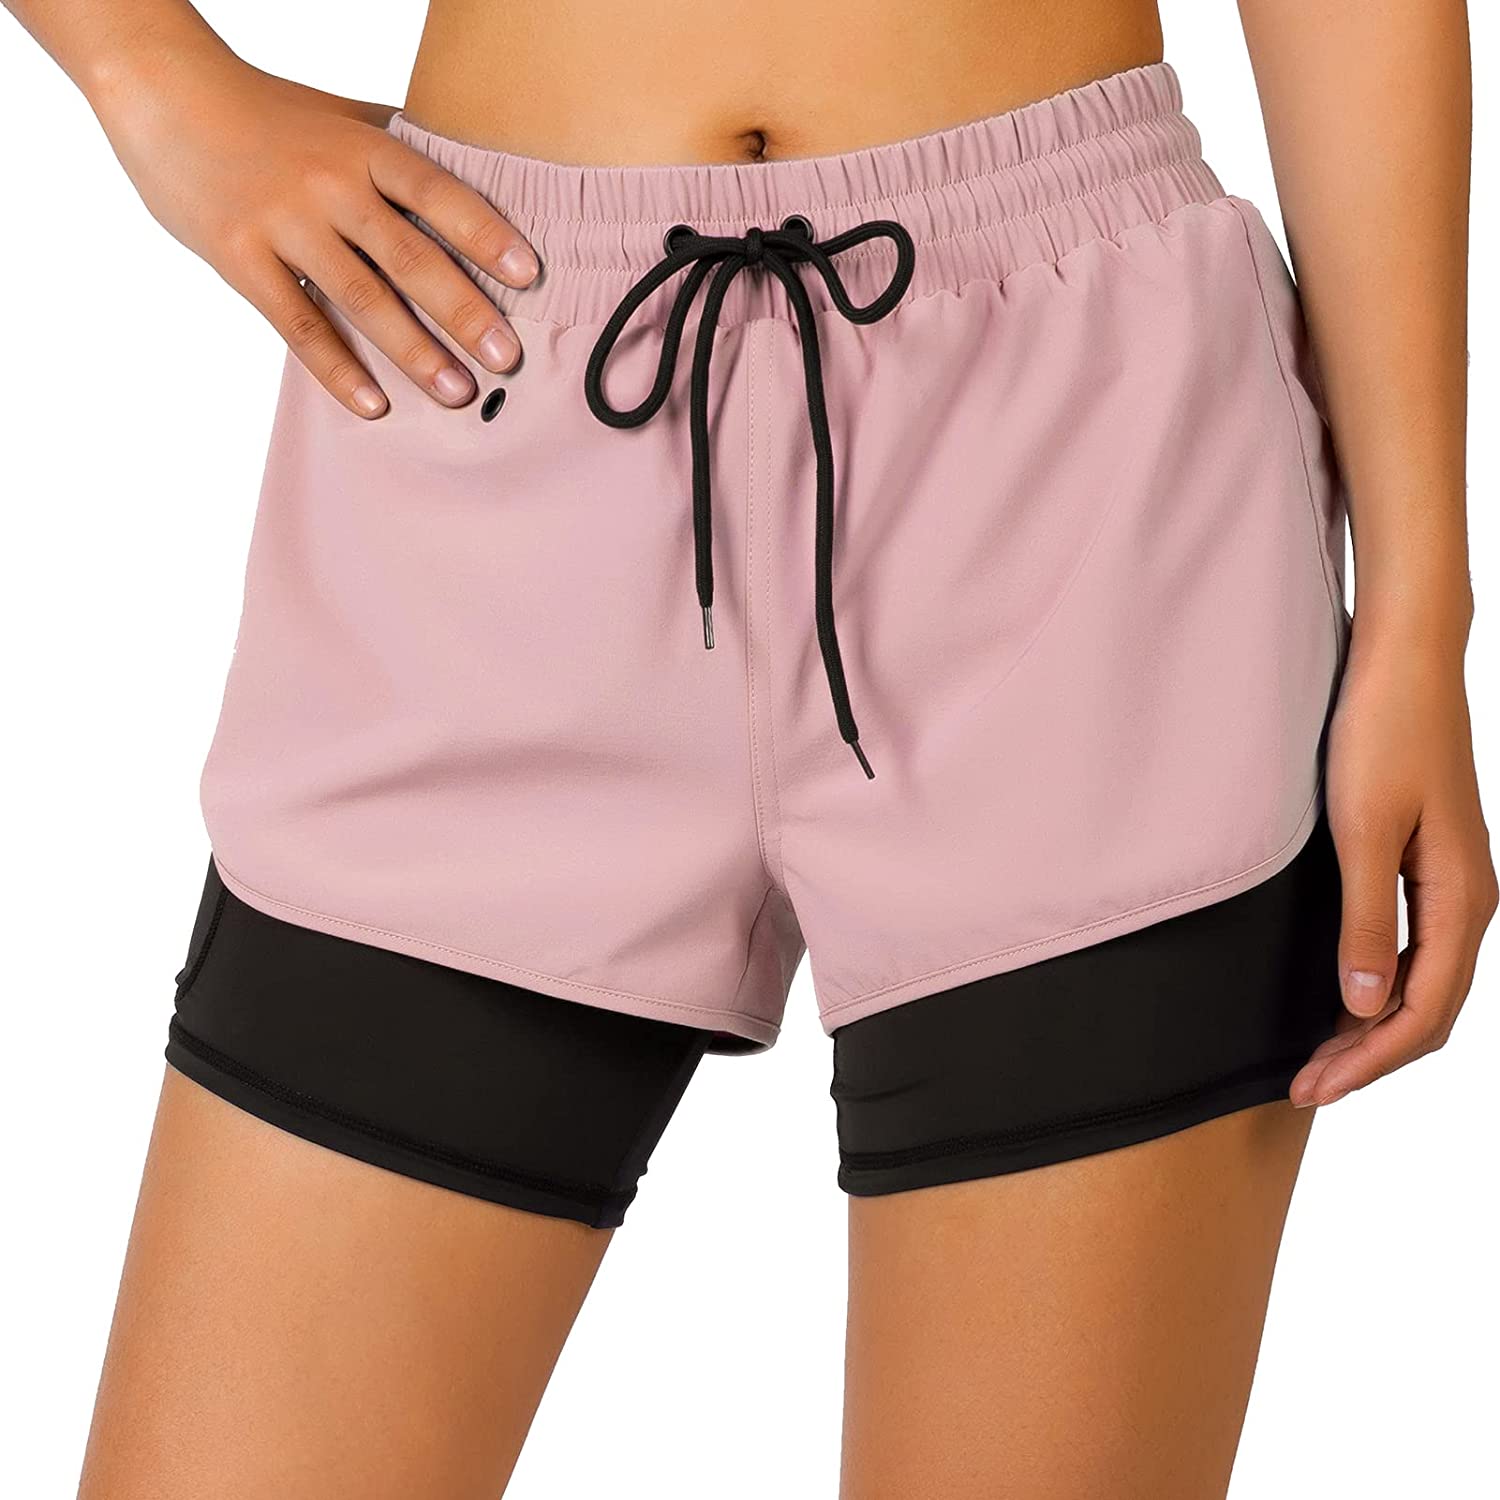 Cycorld Women's-Running-Shorts, 2 in 1 Quick Dry Sports Workout Fitnes